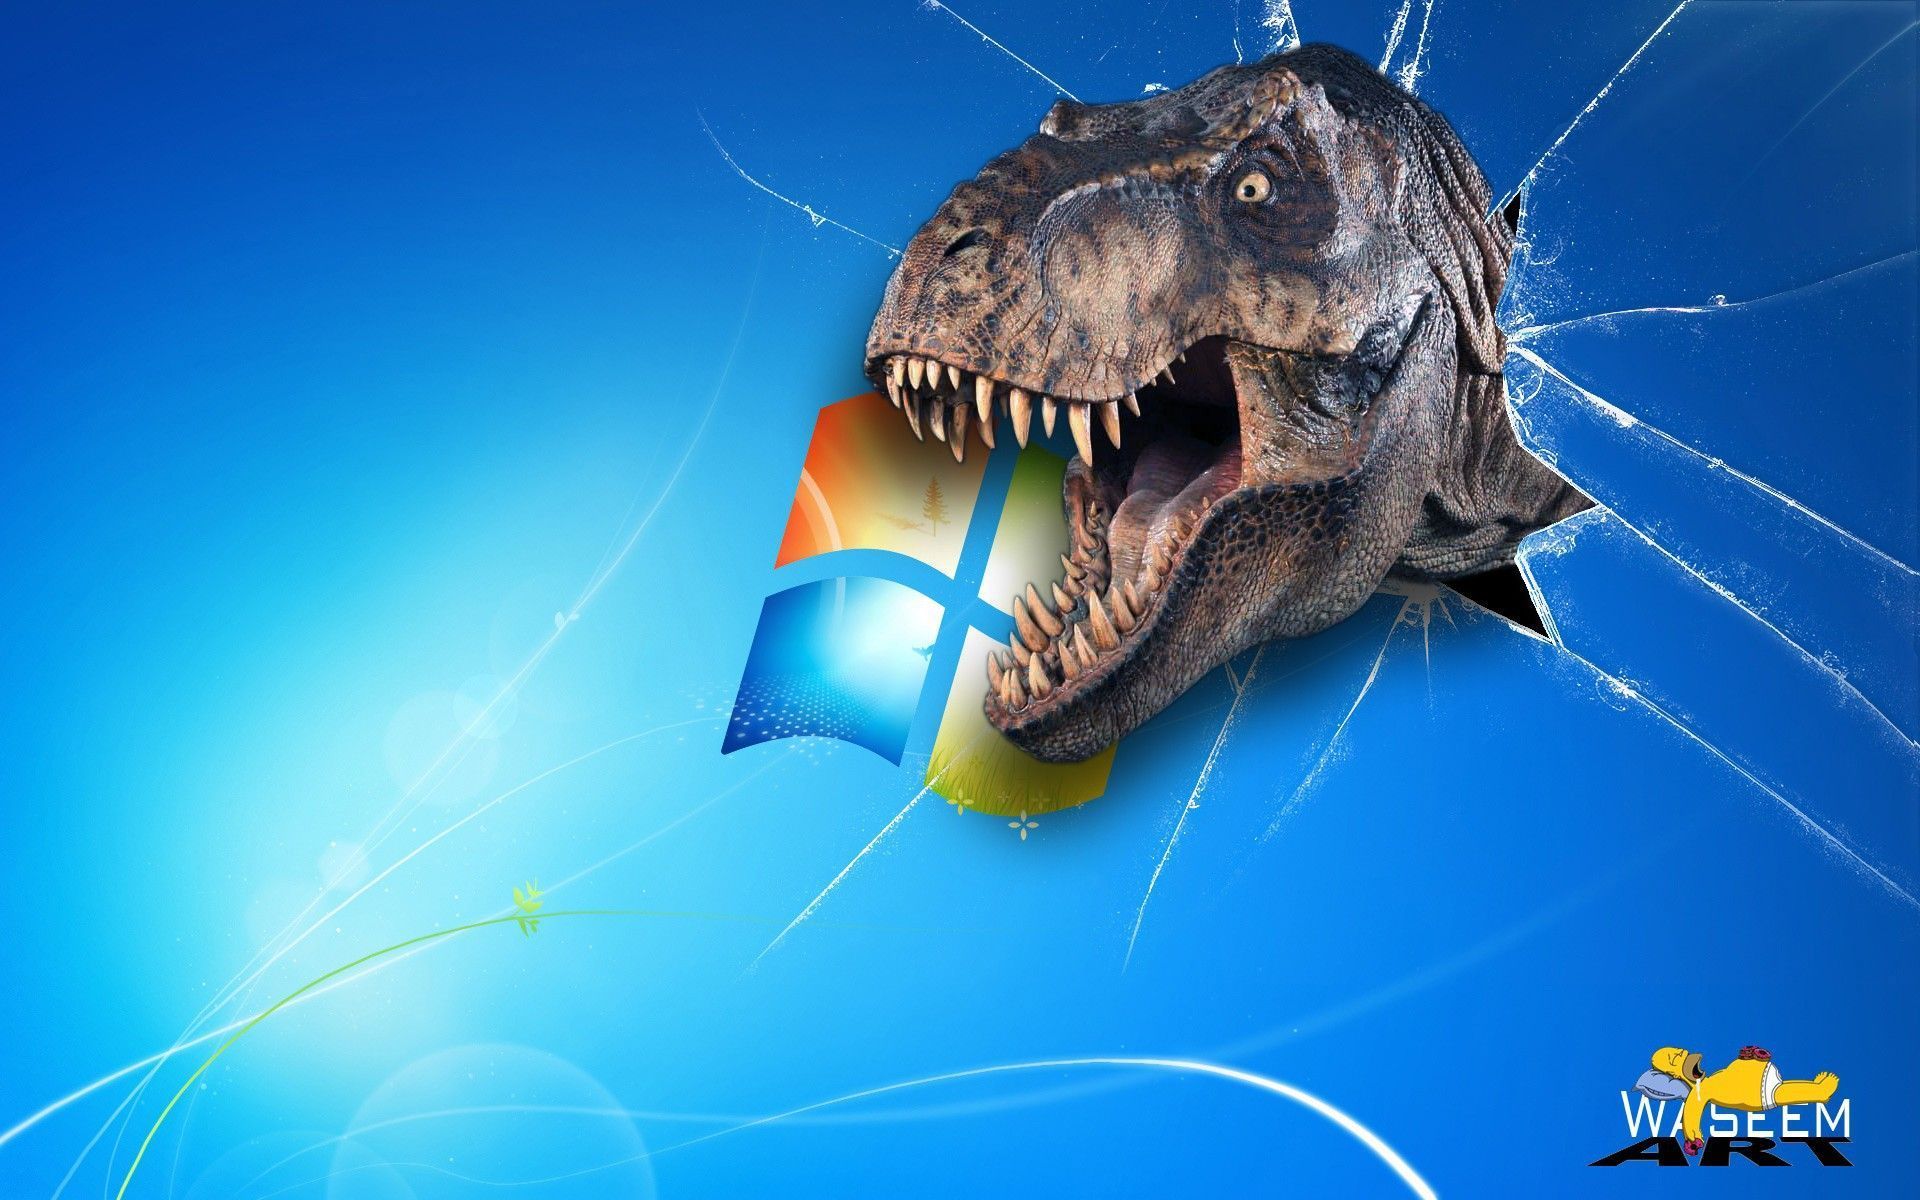 Windows with a dinosaur wallpapers and images - wallpapers ...